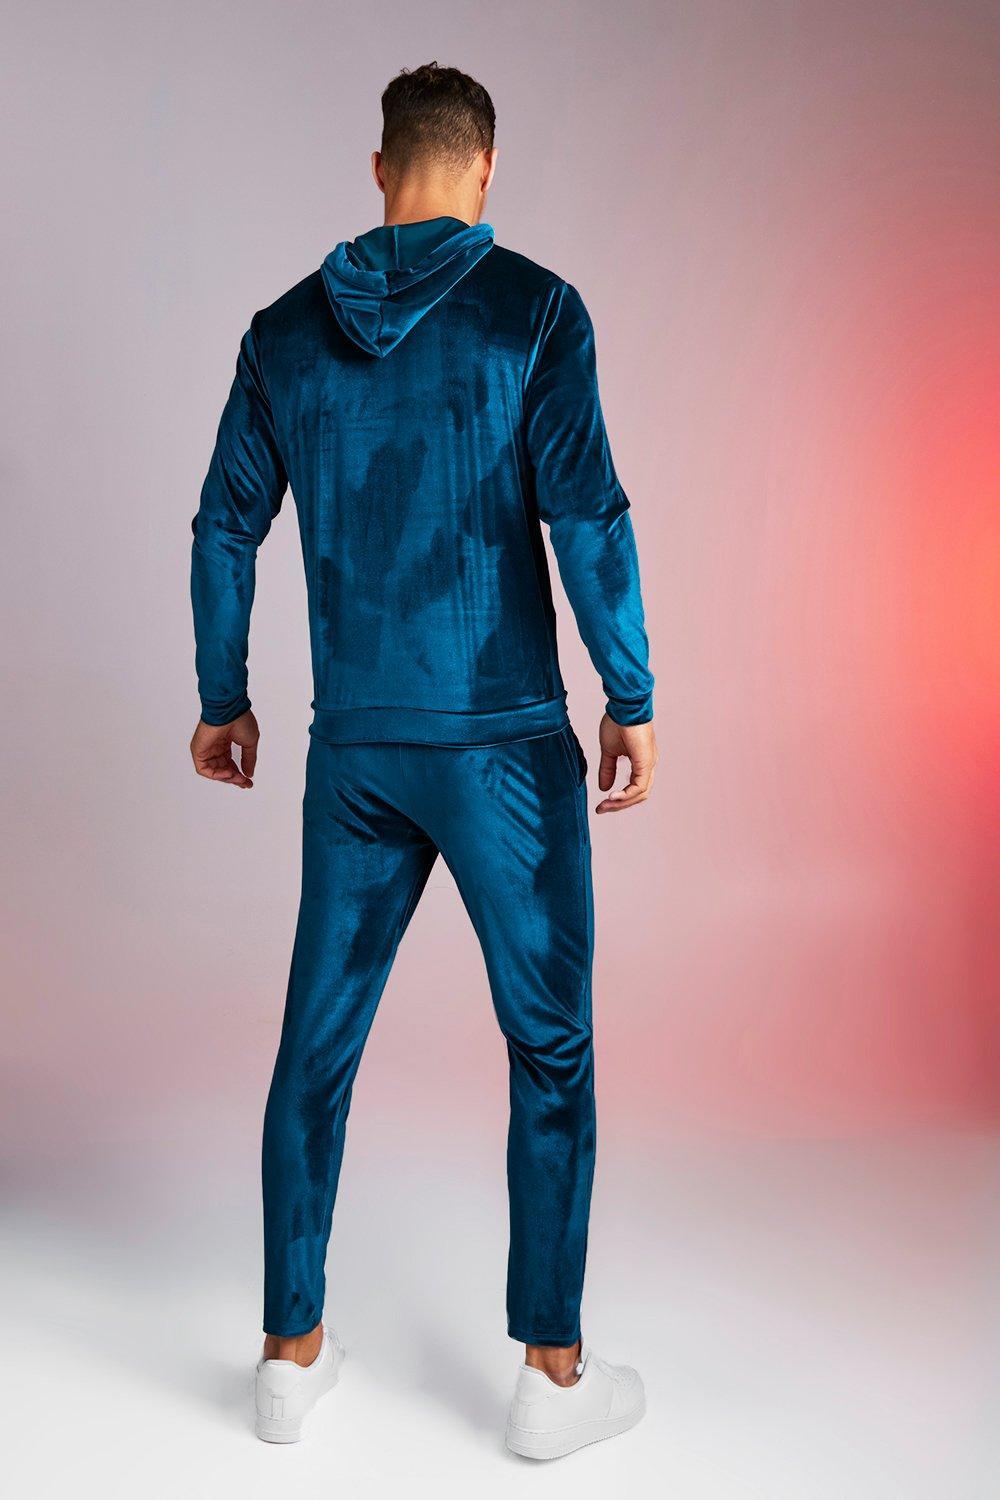 BoohooMAN Man Signature Shiny Velour Hooded Tracksuit in Blue for Men ...